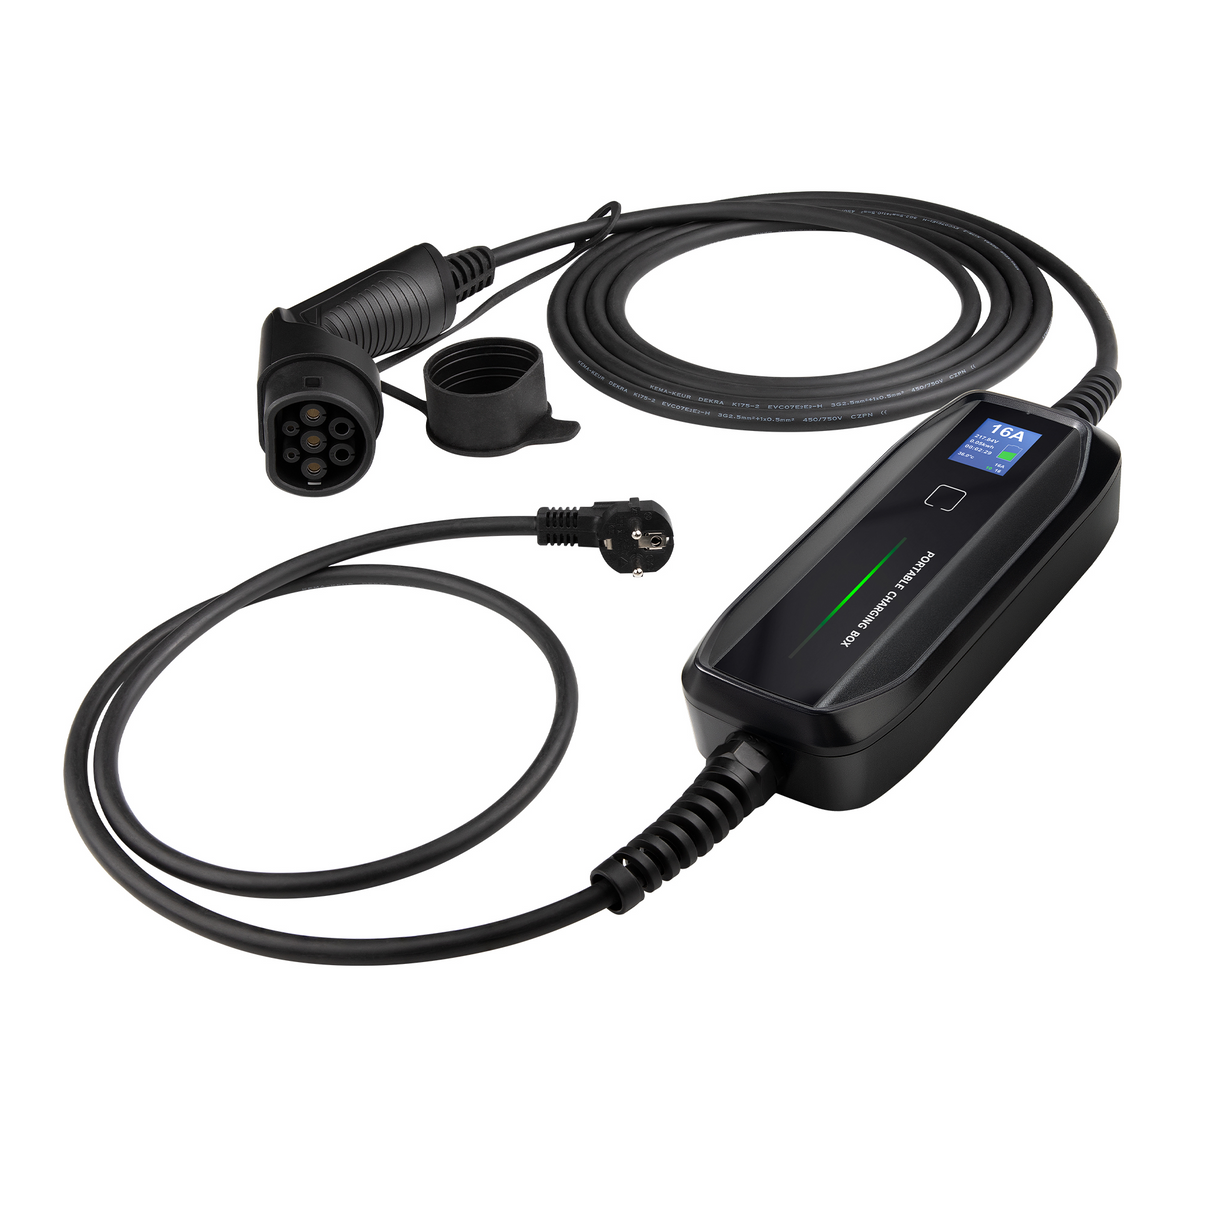 Mobile Charger Volvo V90 - LCD Black Type 2 to Schuko